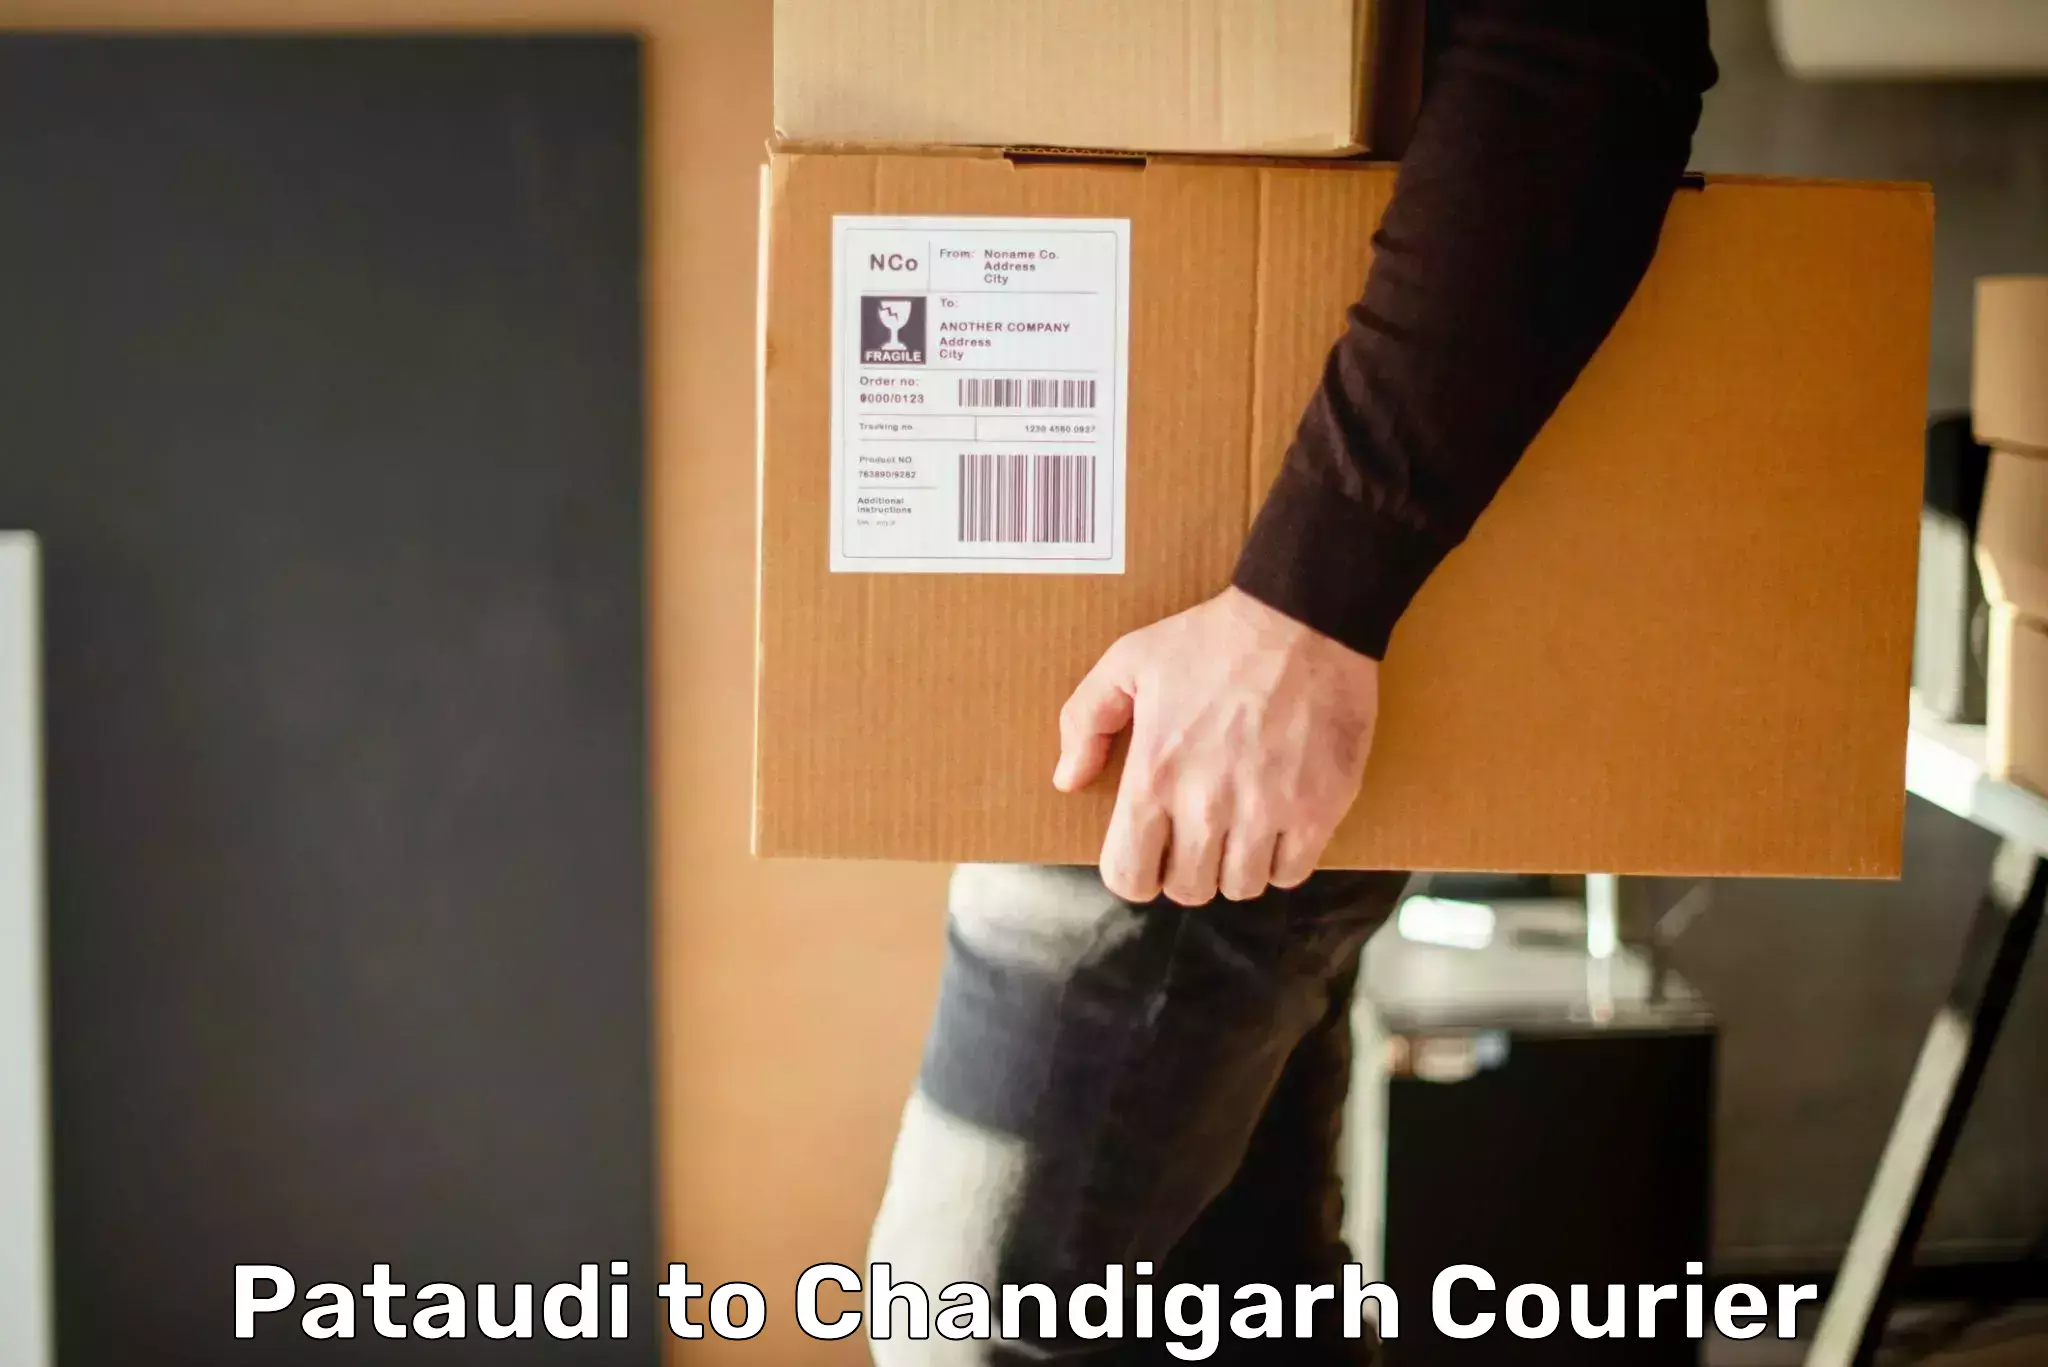 Courier service innovation Pataudi to Chandigarh